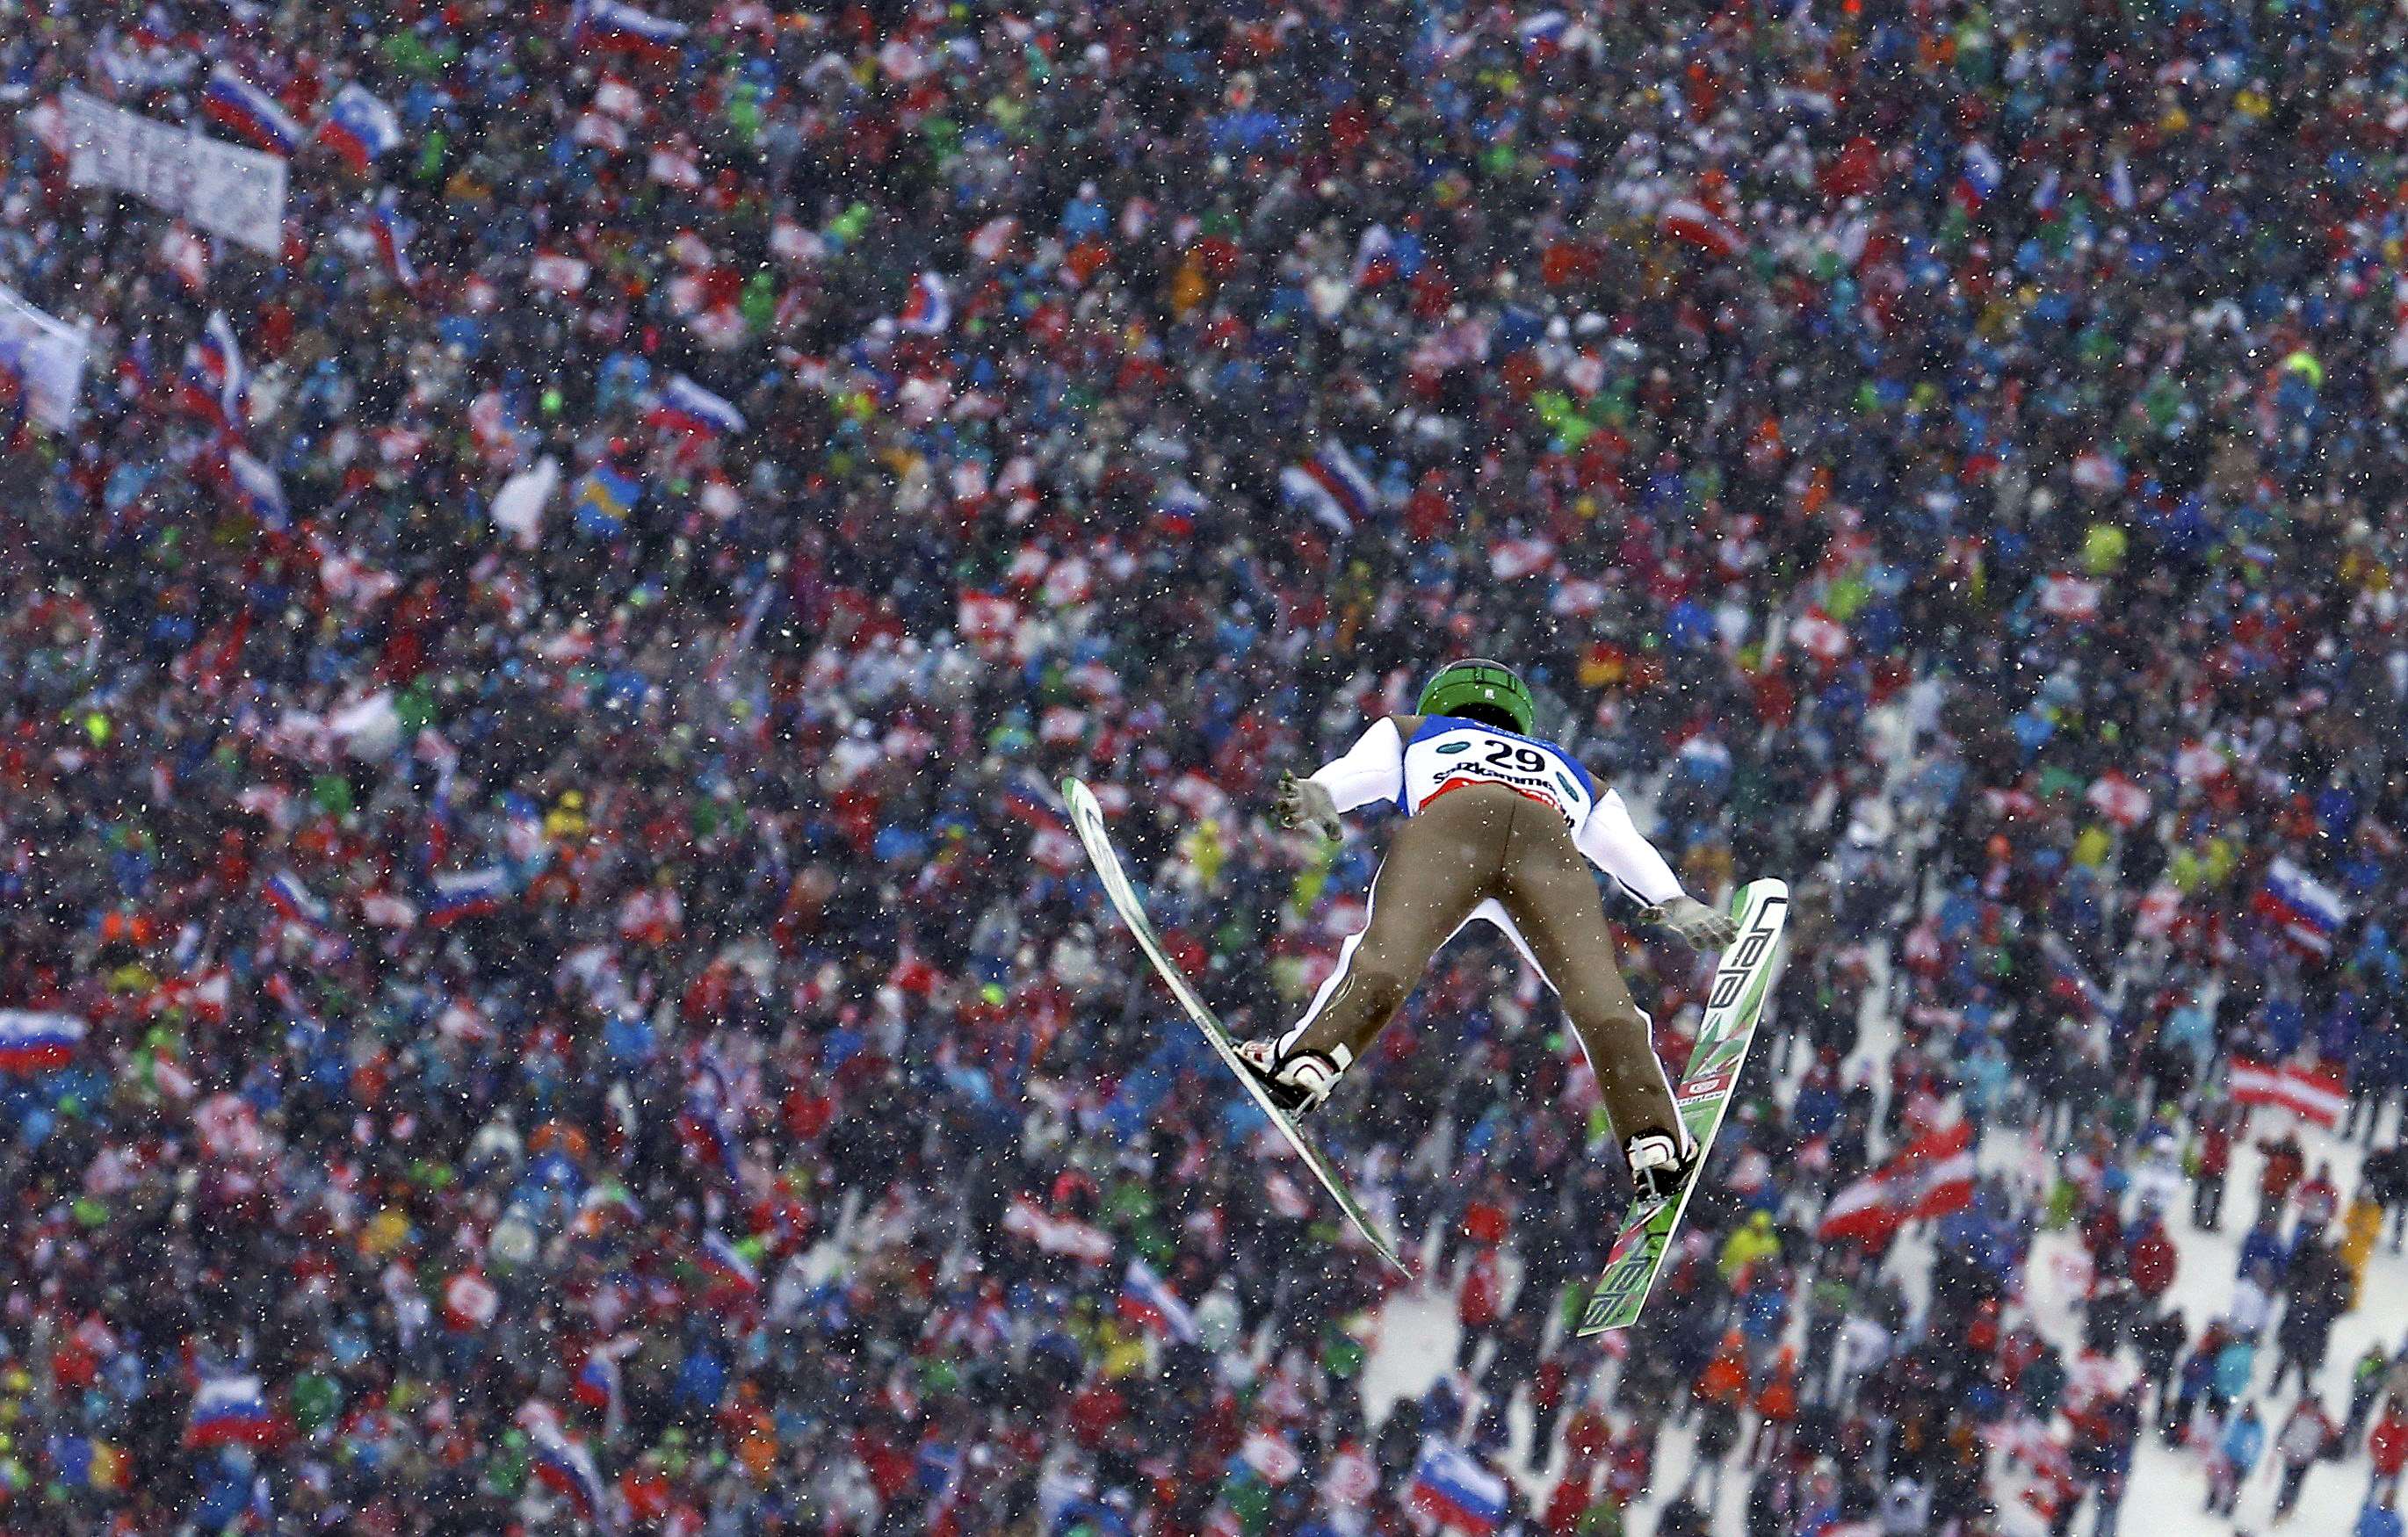 Peter Prevc of Slovenia performs a trial jump during the Ski Flying World Championships at Kulm hill in Bad Mitterndorf, Austria January 16, 2016.  REUTERS/Heinz-Peter Bader